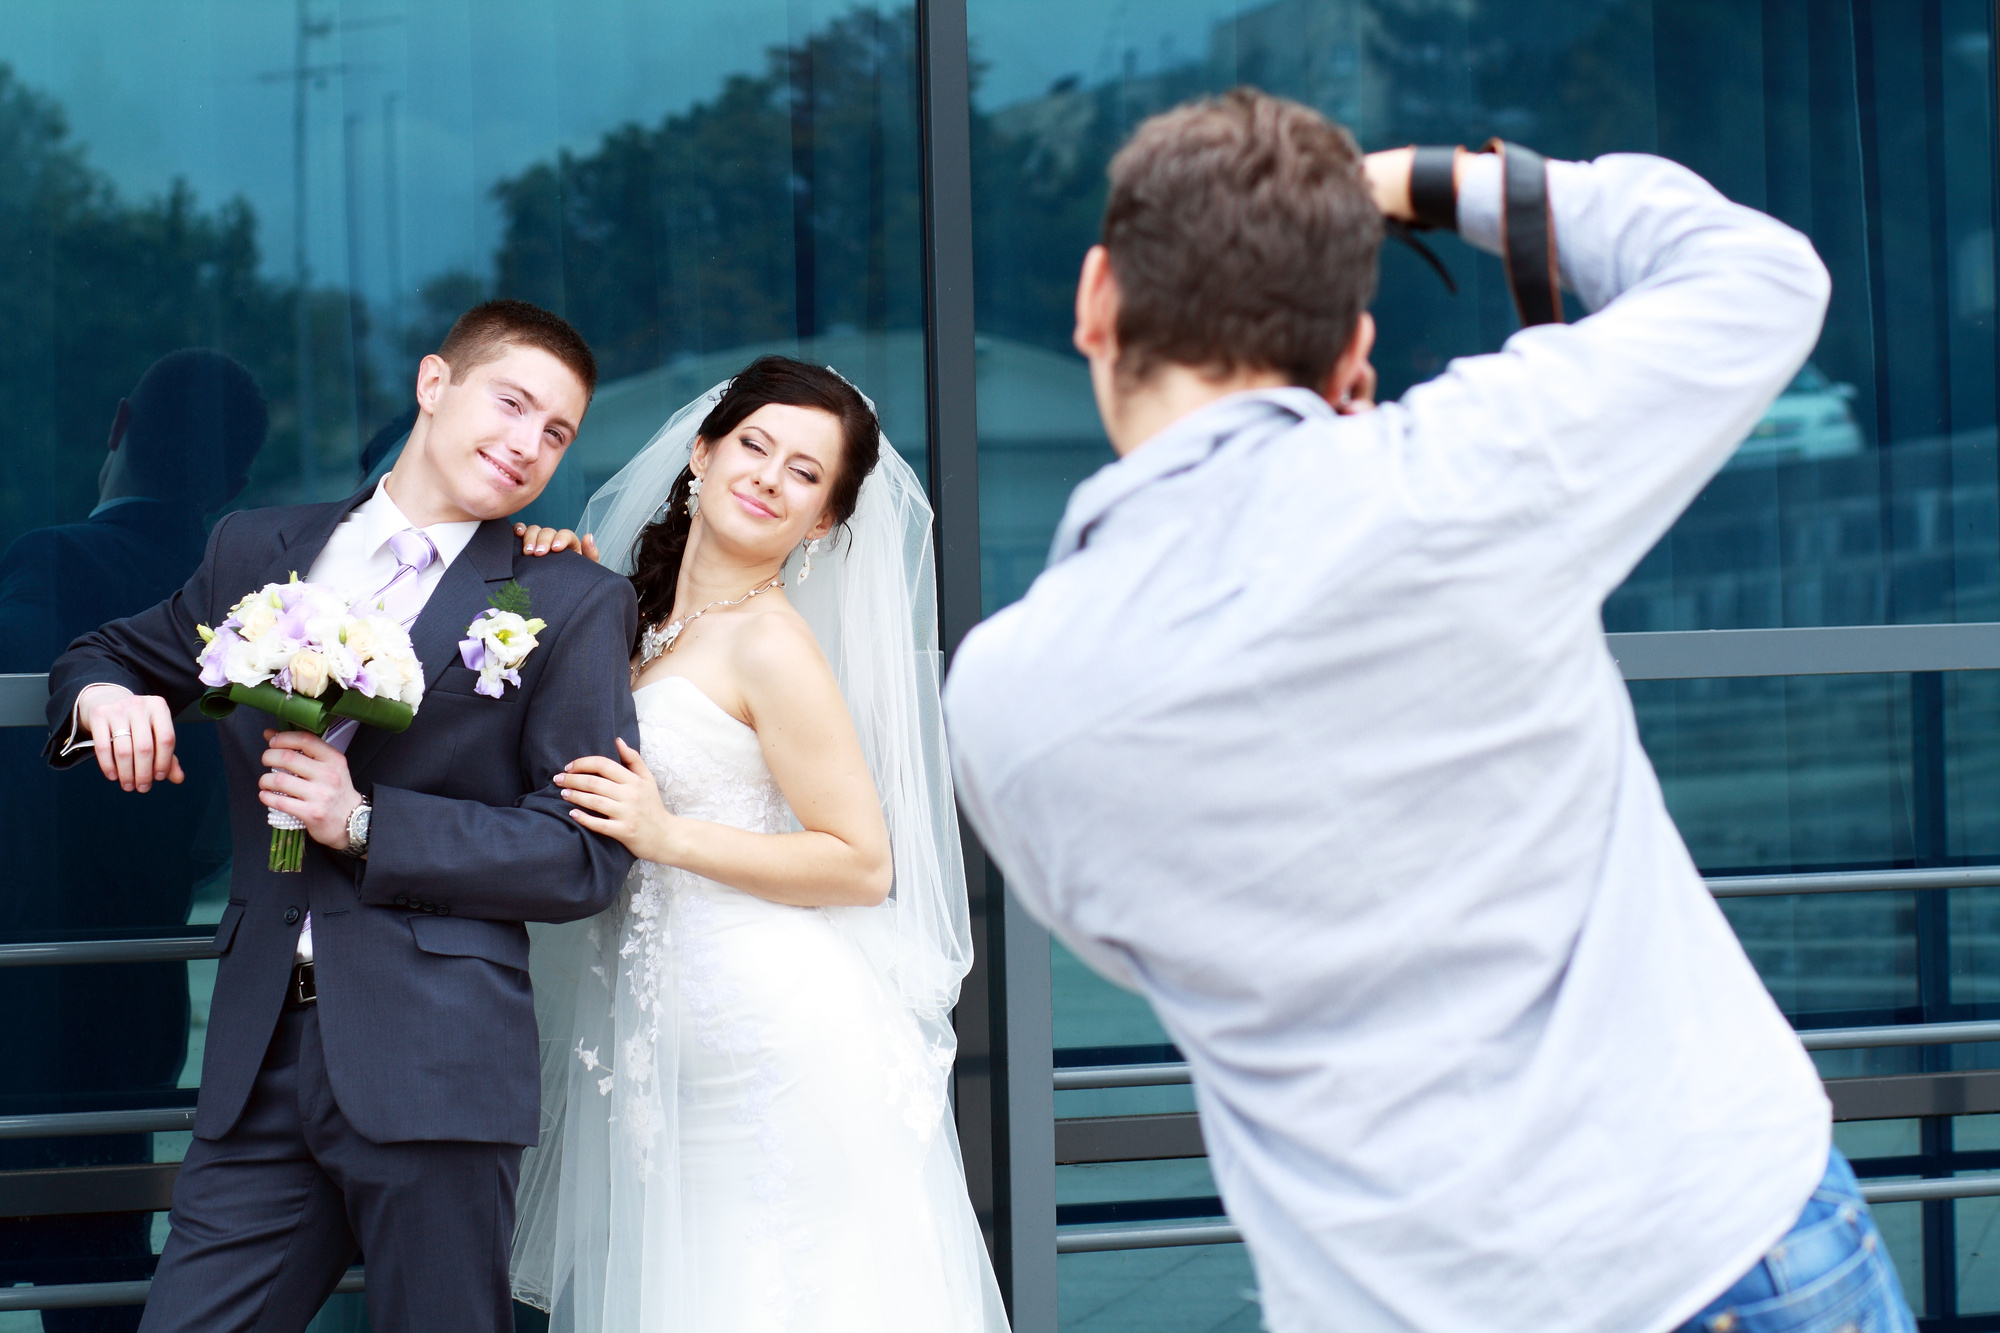 Top 10 Tips for Choosing the Best Wedding Photographer